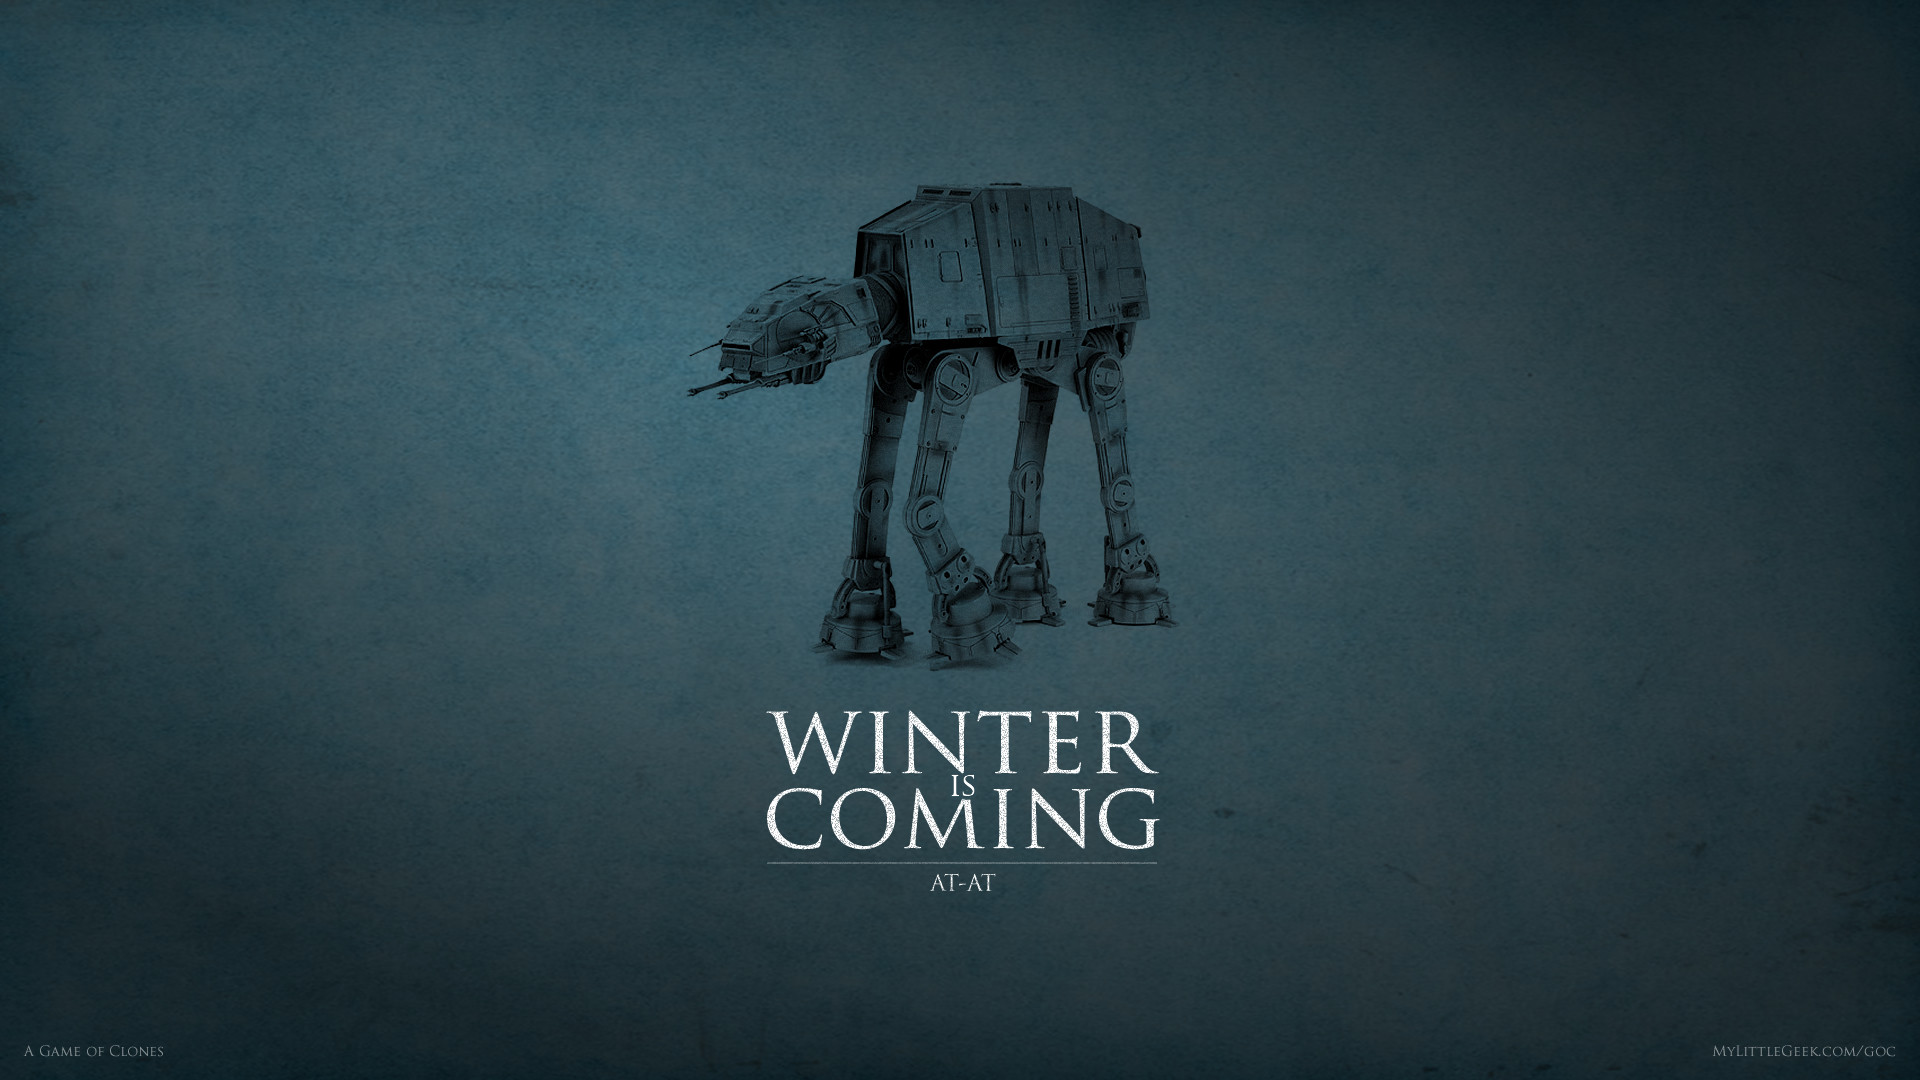 winter is coming wallpaper,font,text,logo,graphics,illustration